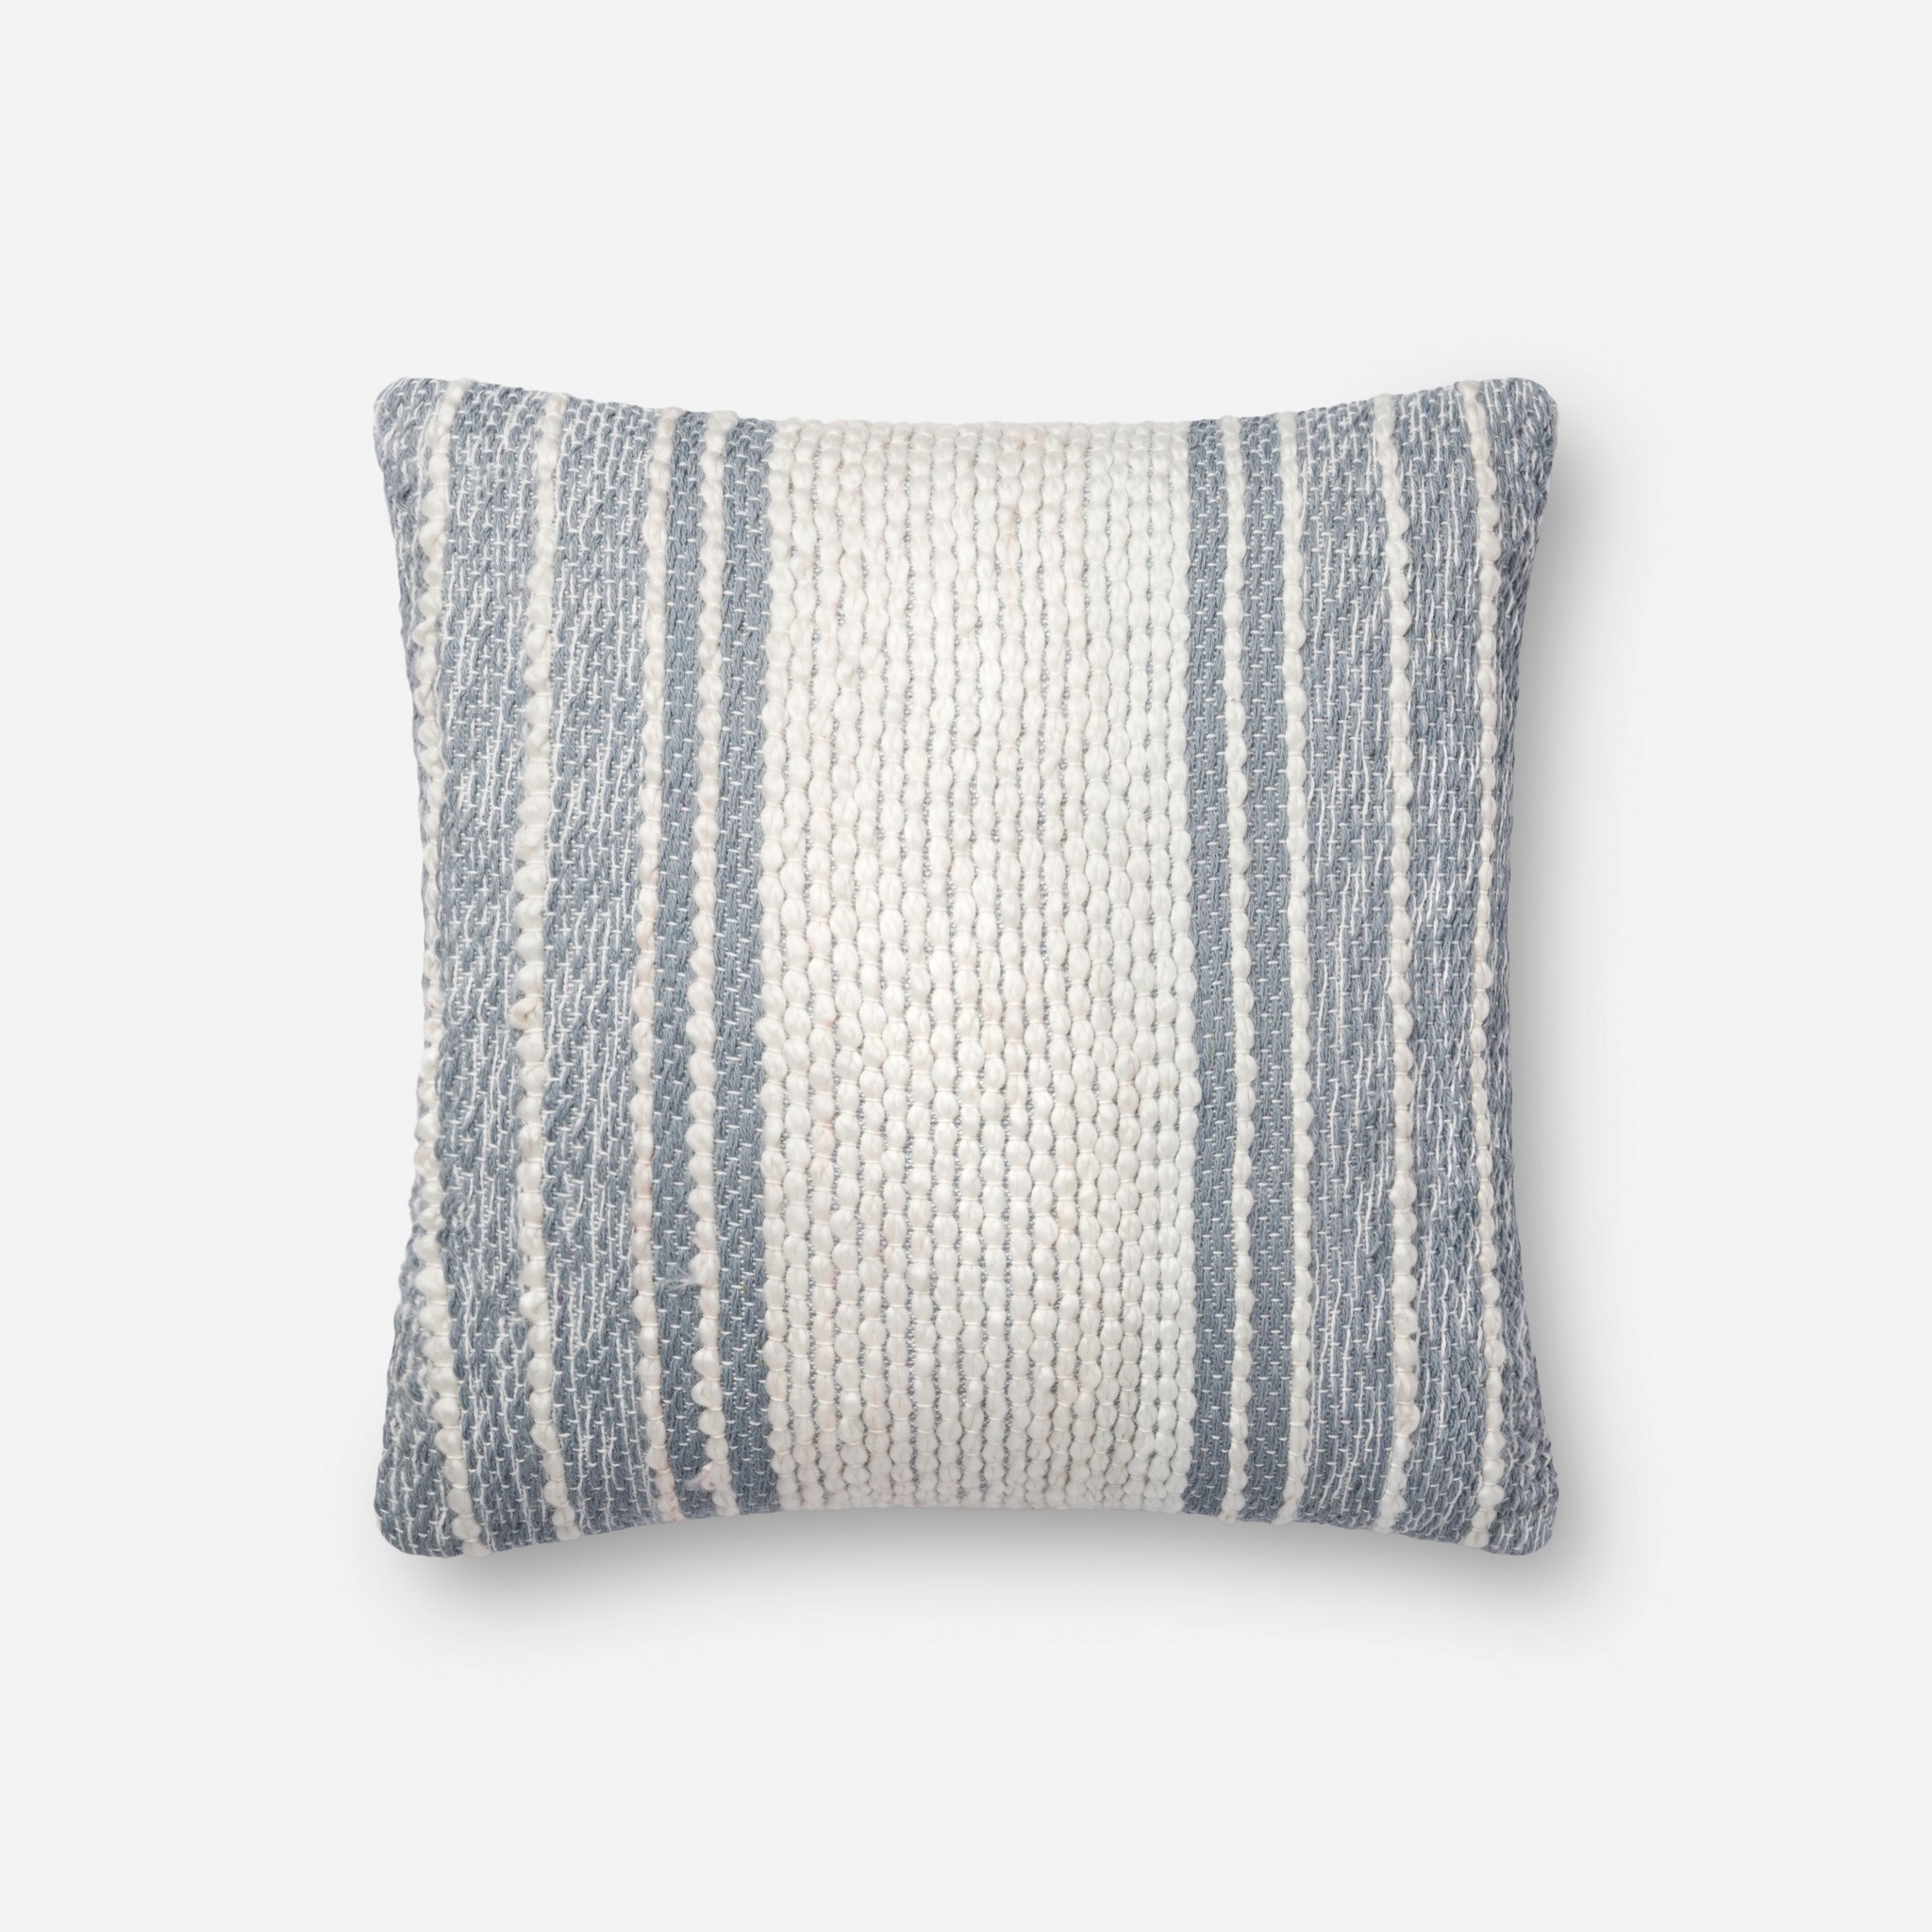 Magnolia Home by Joanna Gaines Jewel Square Throw Pillow, Blue & Ivory, 18" x 18" - Image 0